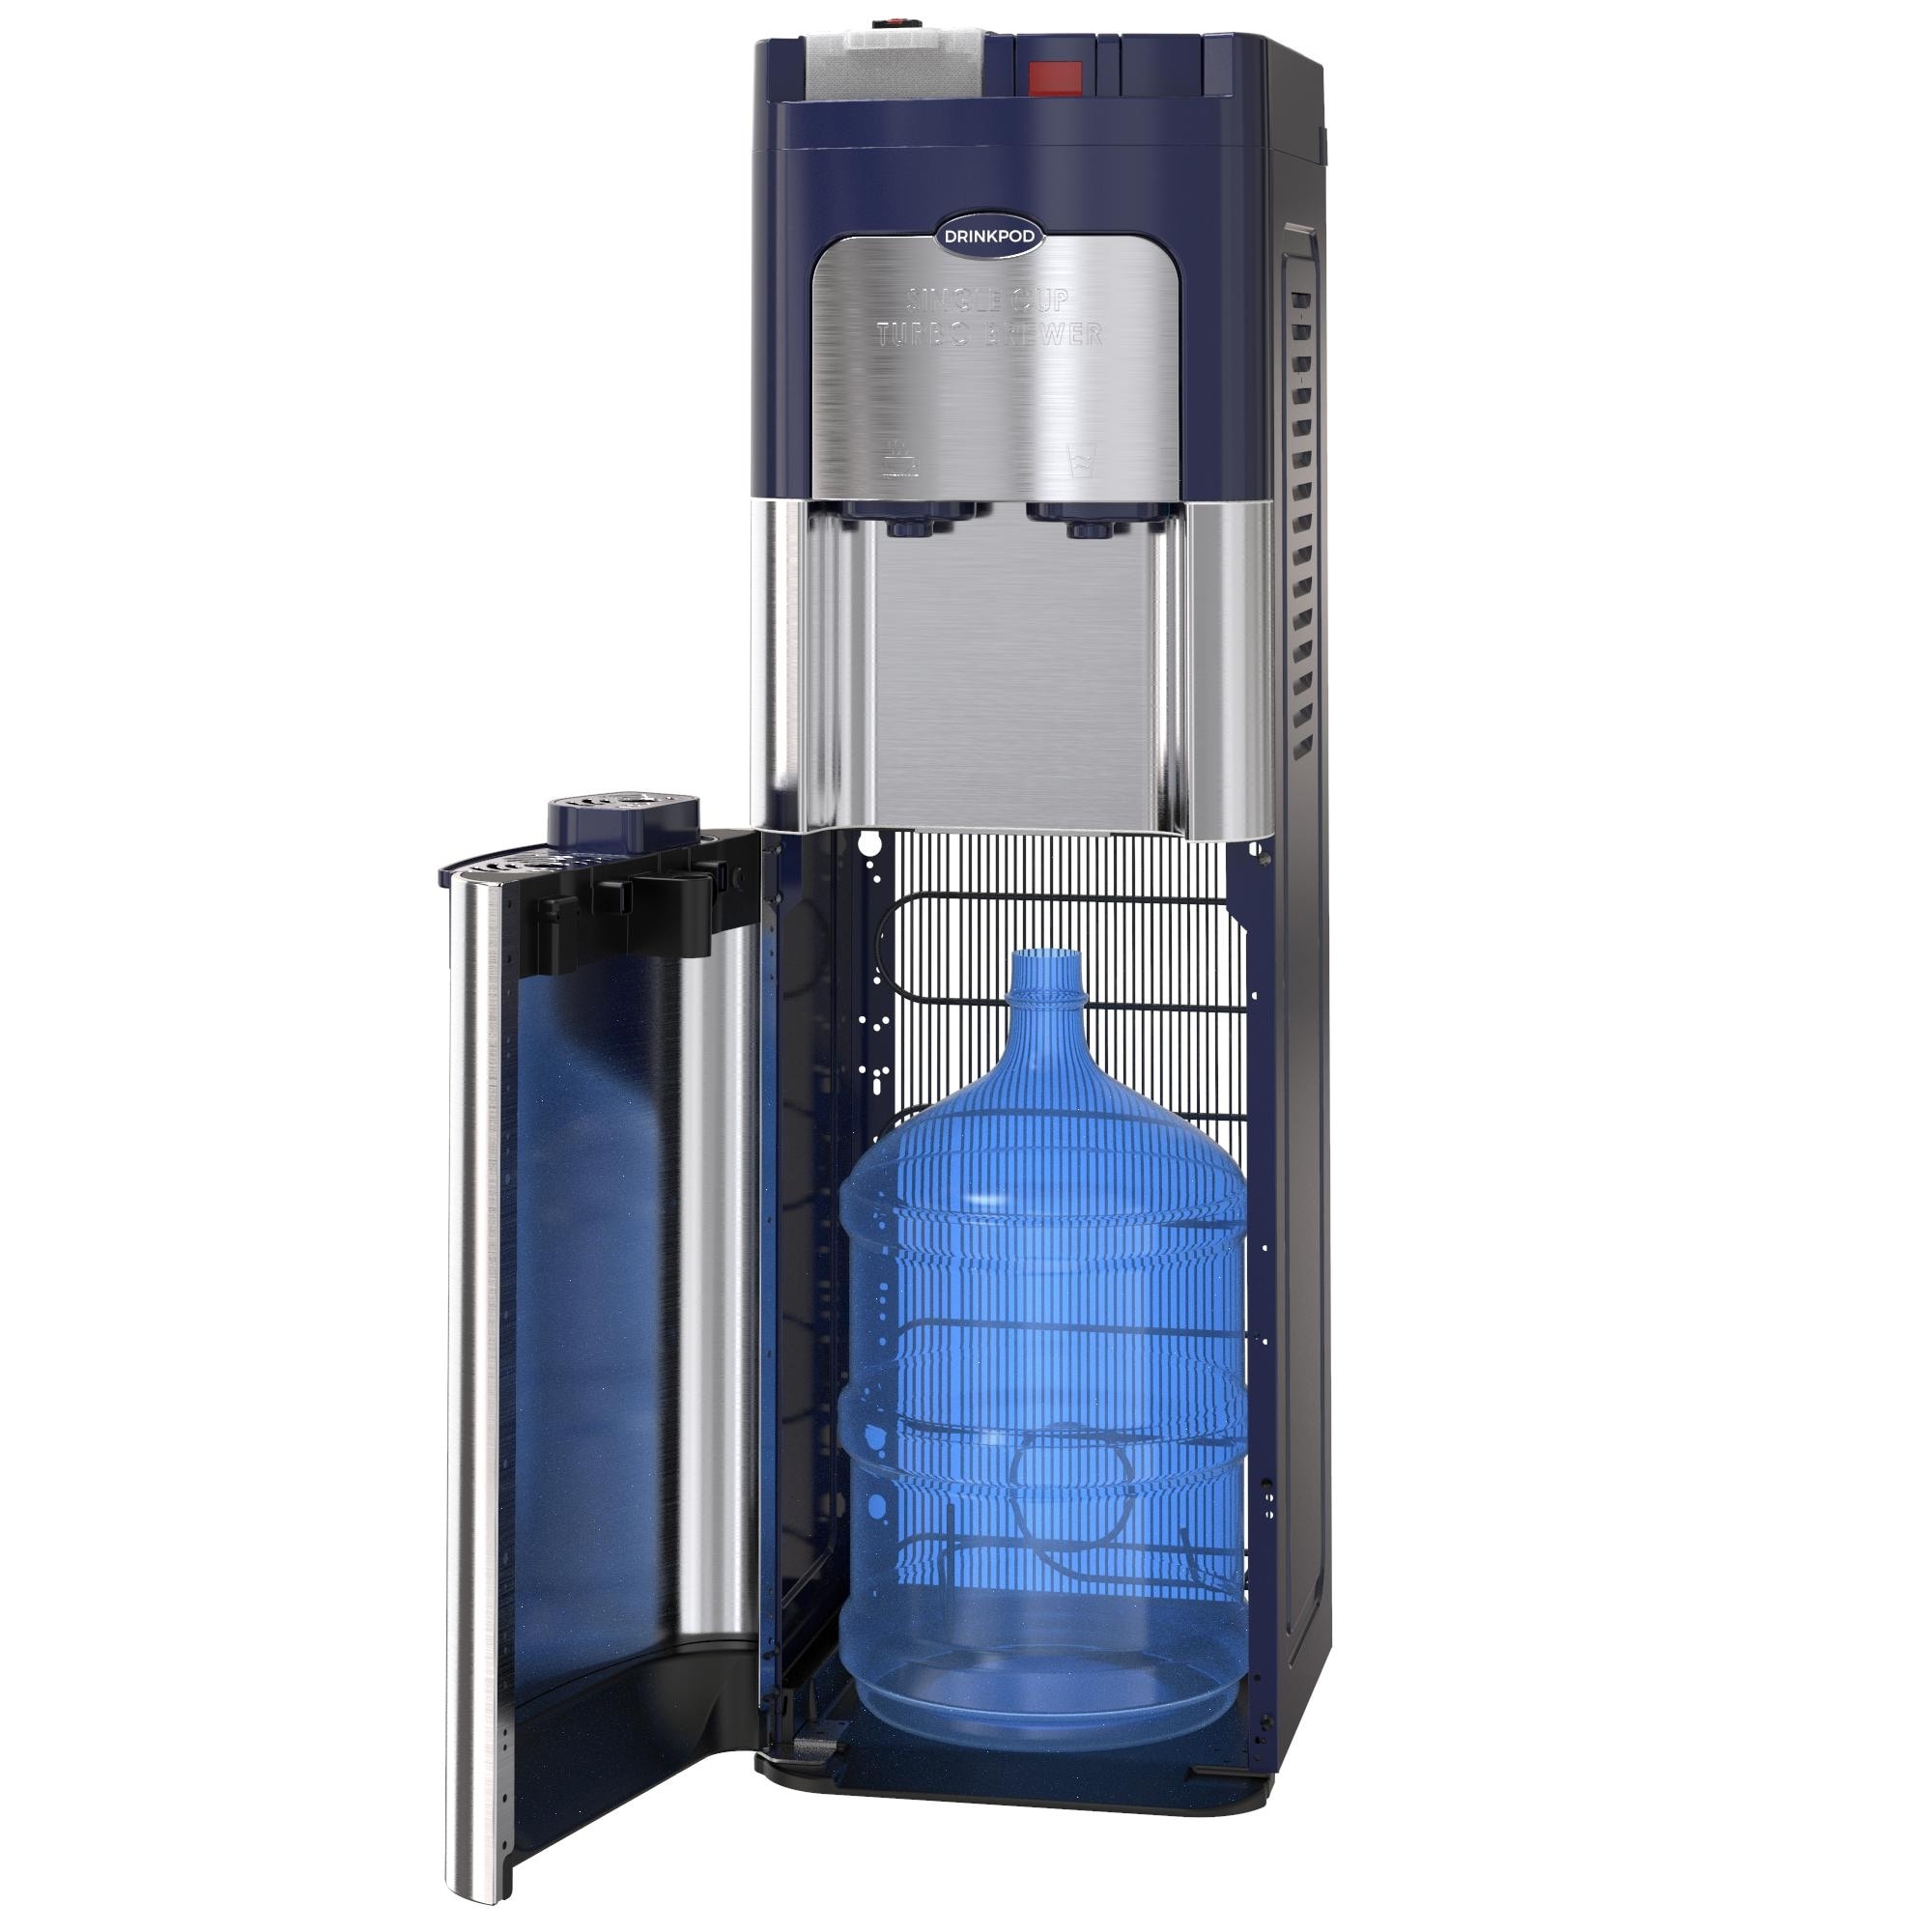 Drinkpod 3000 Elite Series Bottleless Water Cooler with 4 Filters and Integrated K Cup Coffee Maker